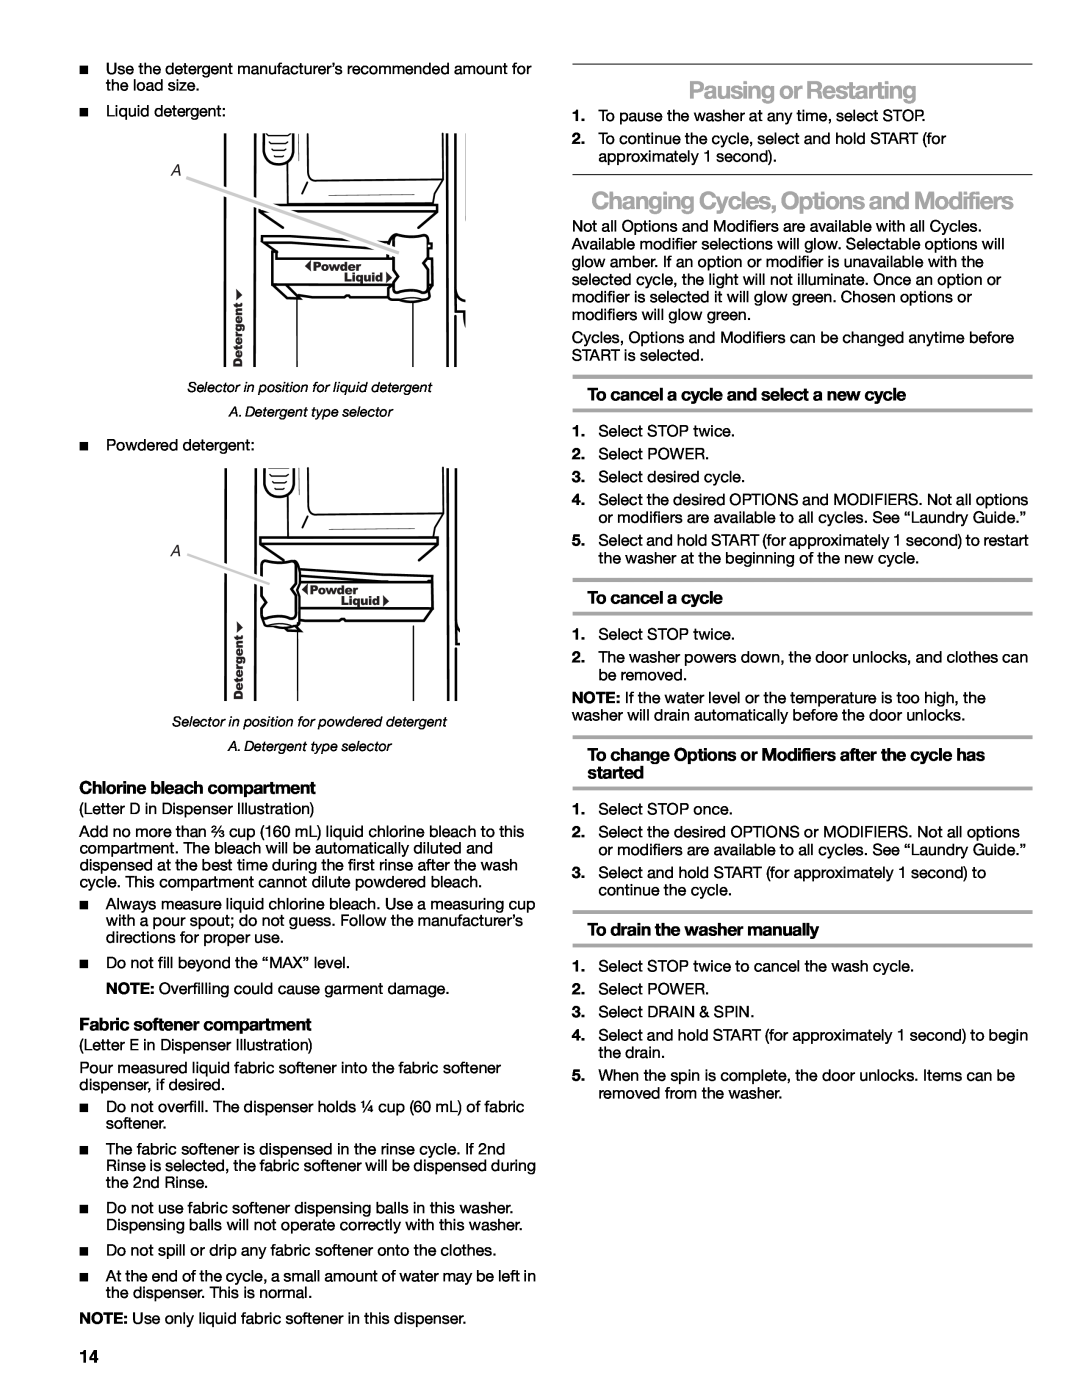 Kenmore W10133487A manual Pausing or Restarting, Changing Cycles, Options and Modifiers, Chlorine bleach compartment 